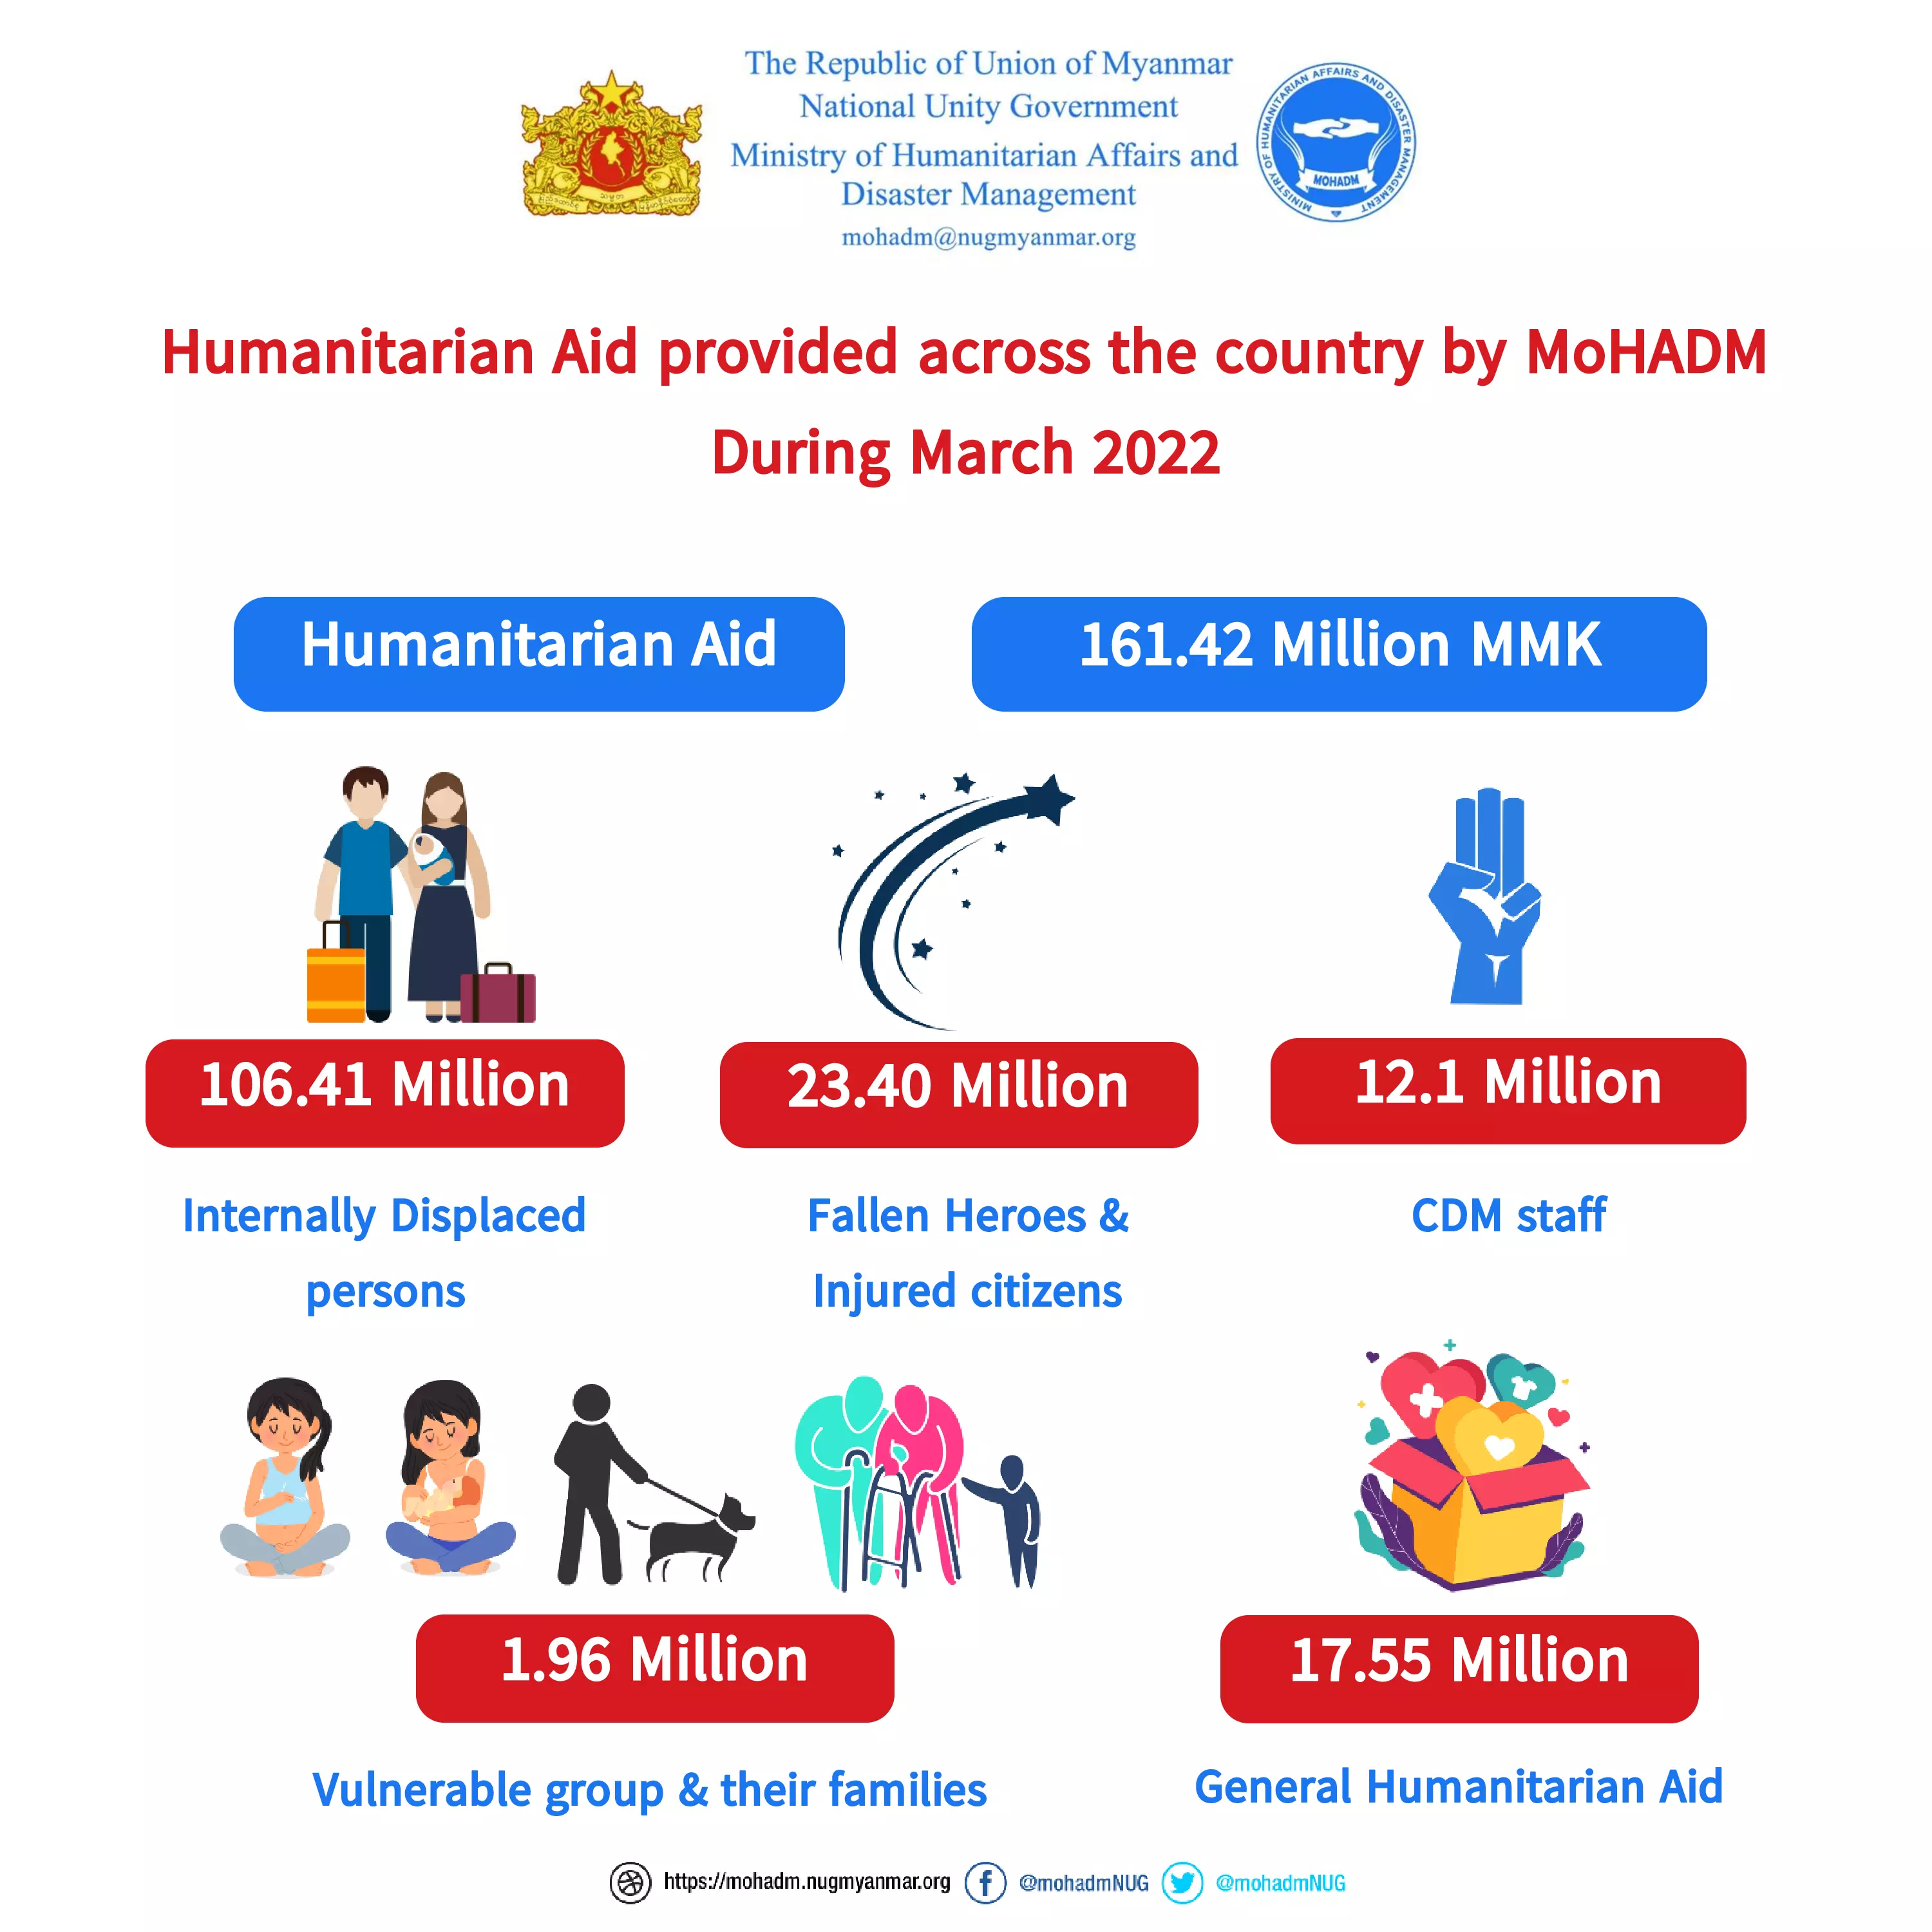 Summary of humanitarian aid provision by MoHADM (March 2022)